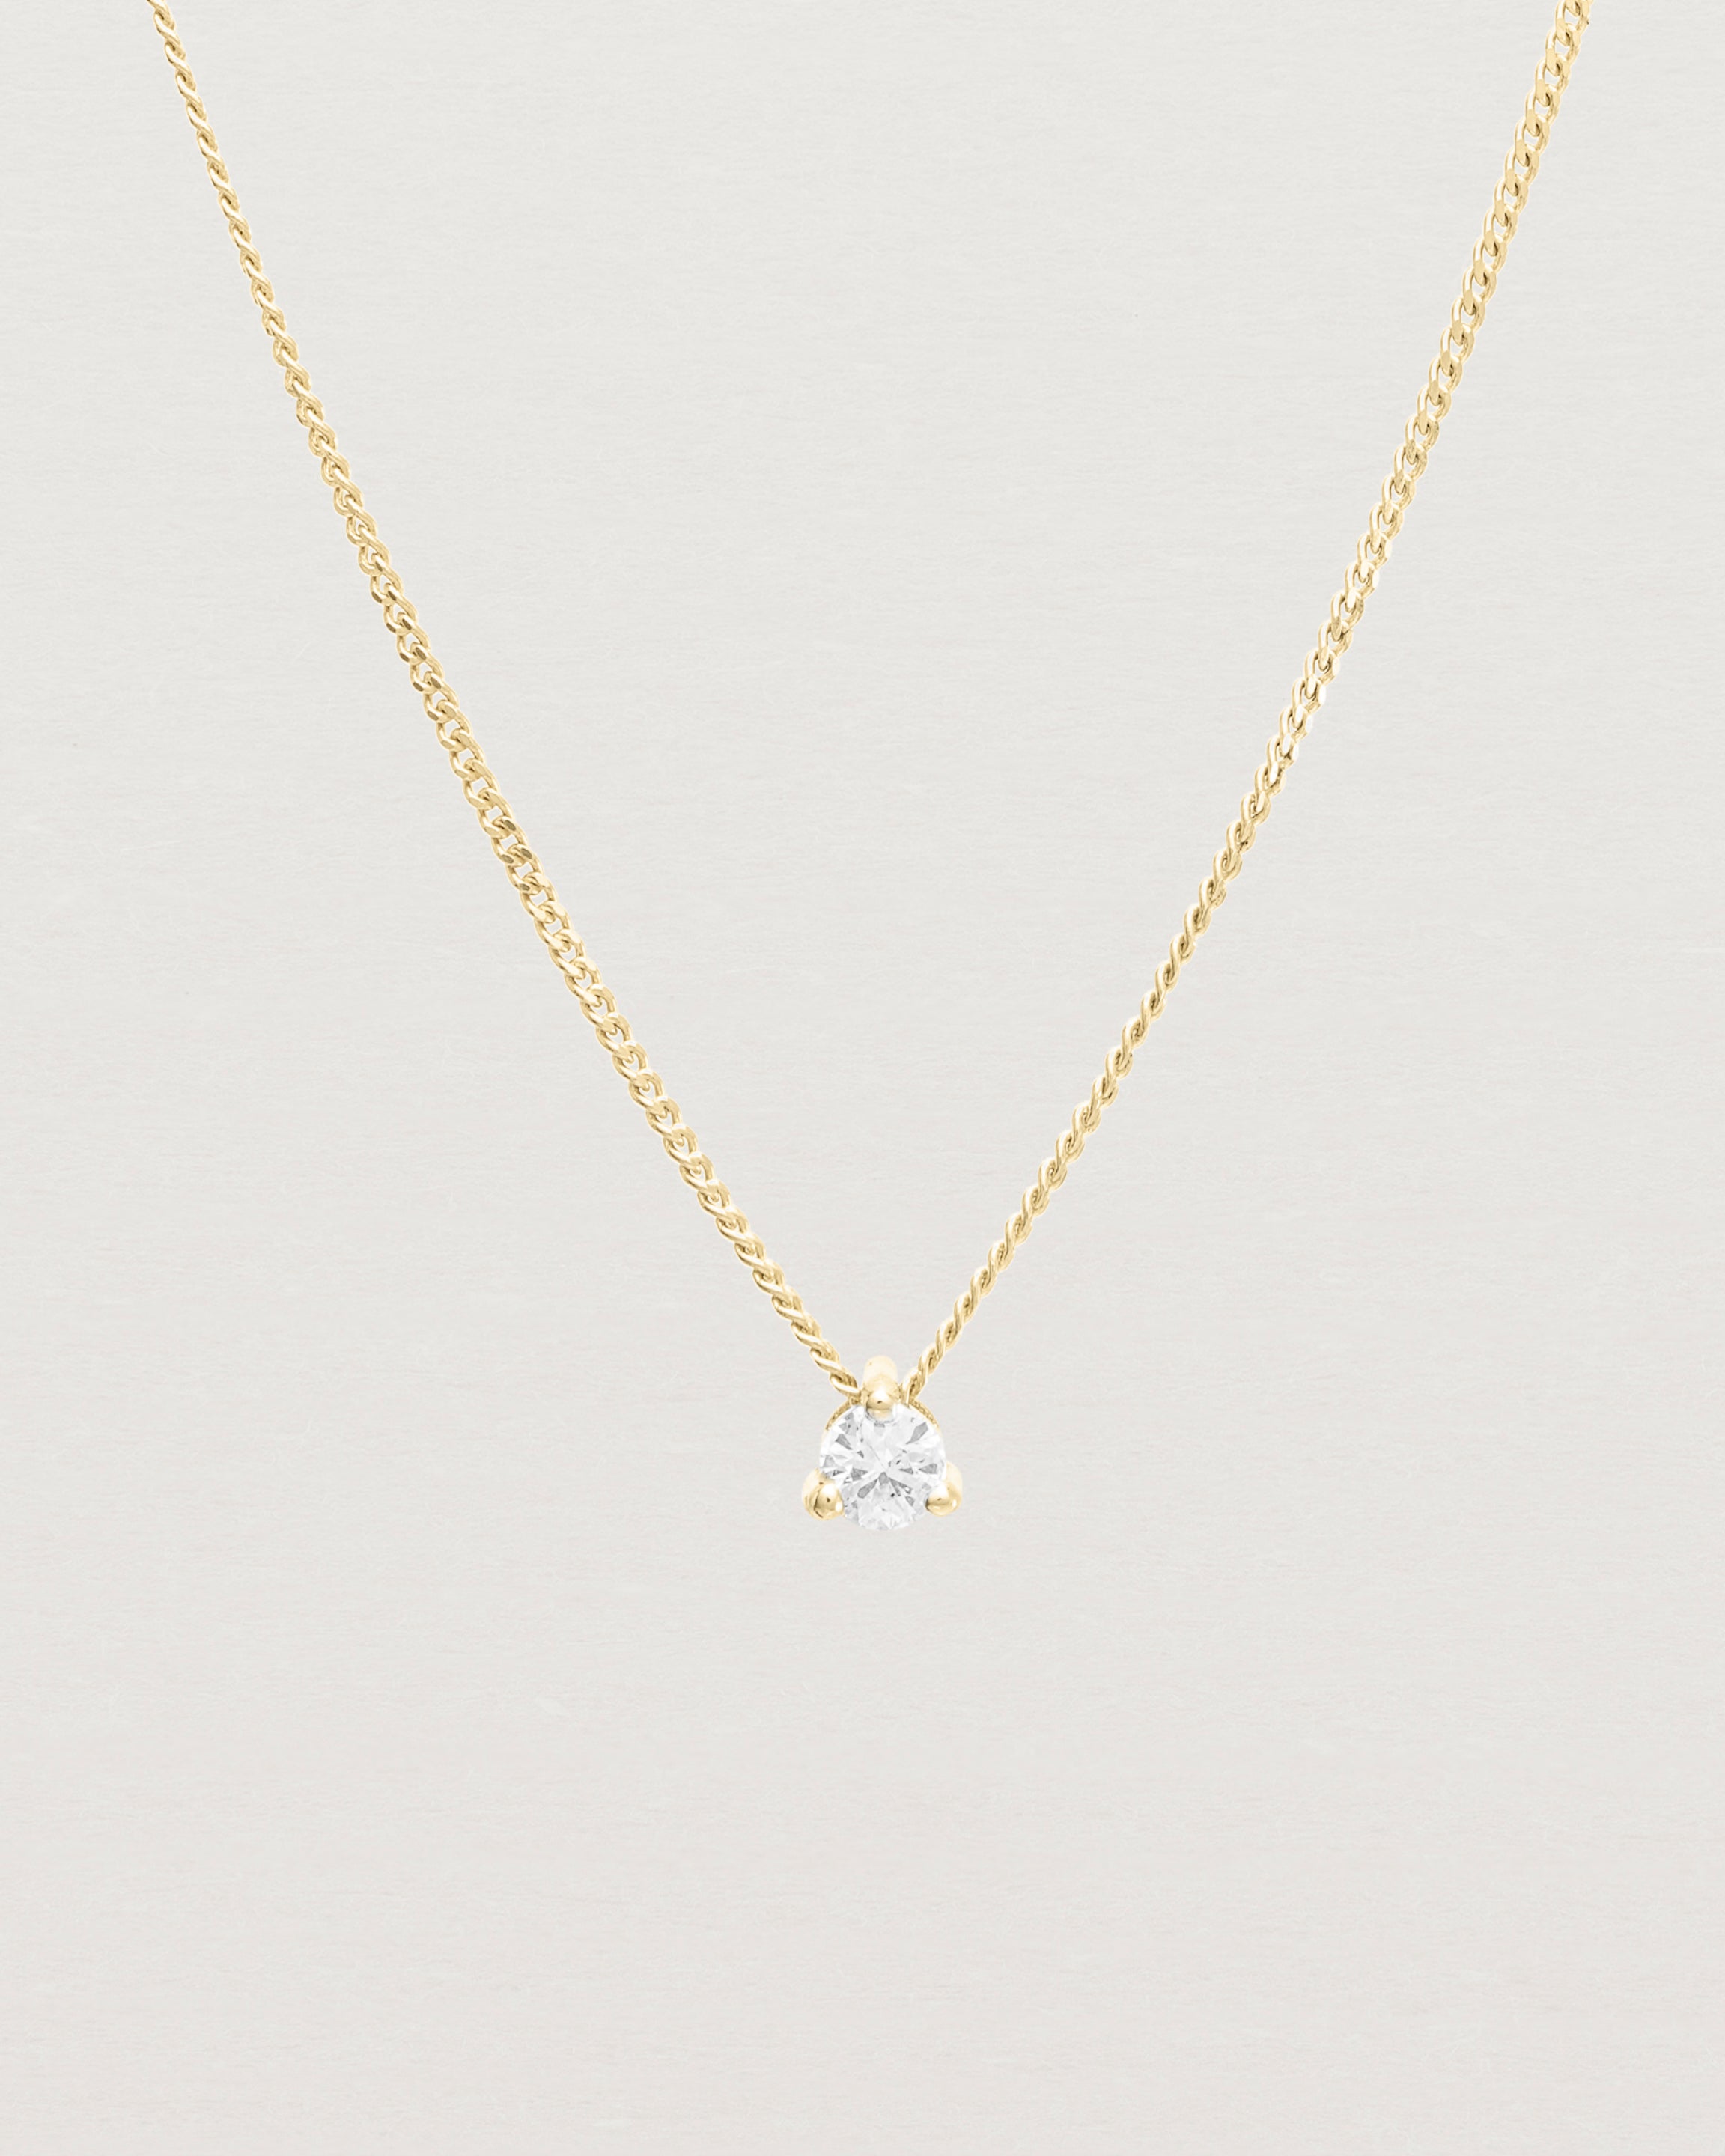 Front view of the Aiona Slider Necklace | Old Cut Diamond | Yellow Gold.